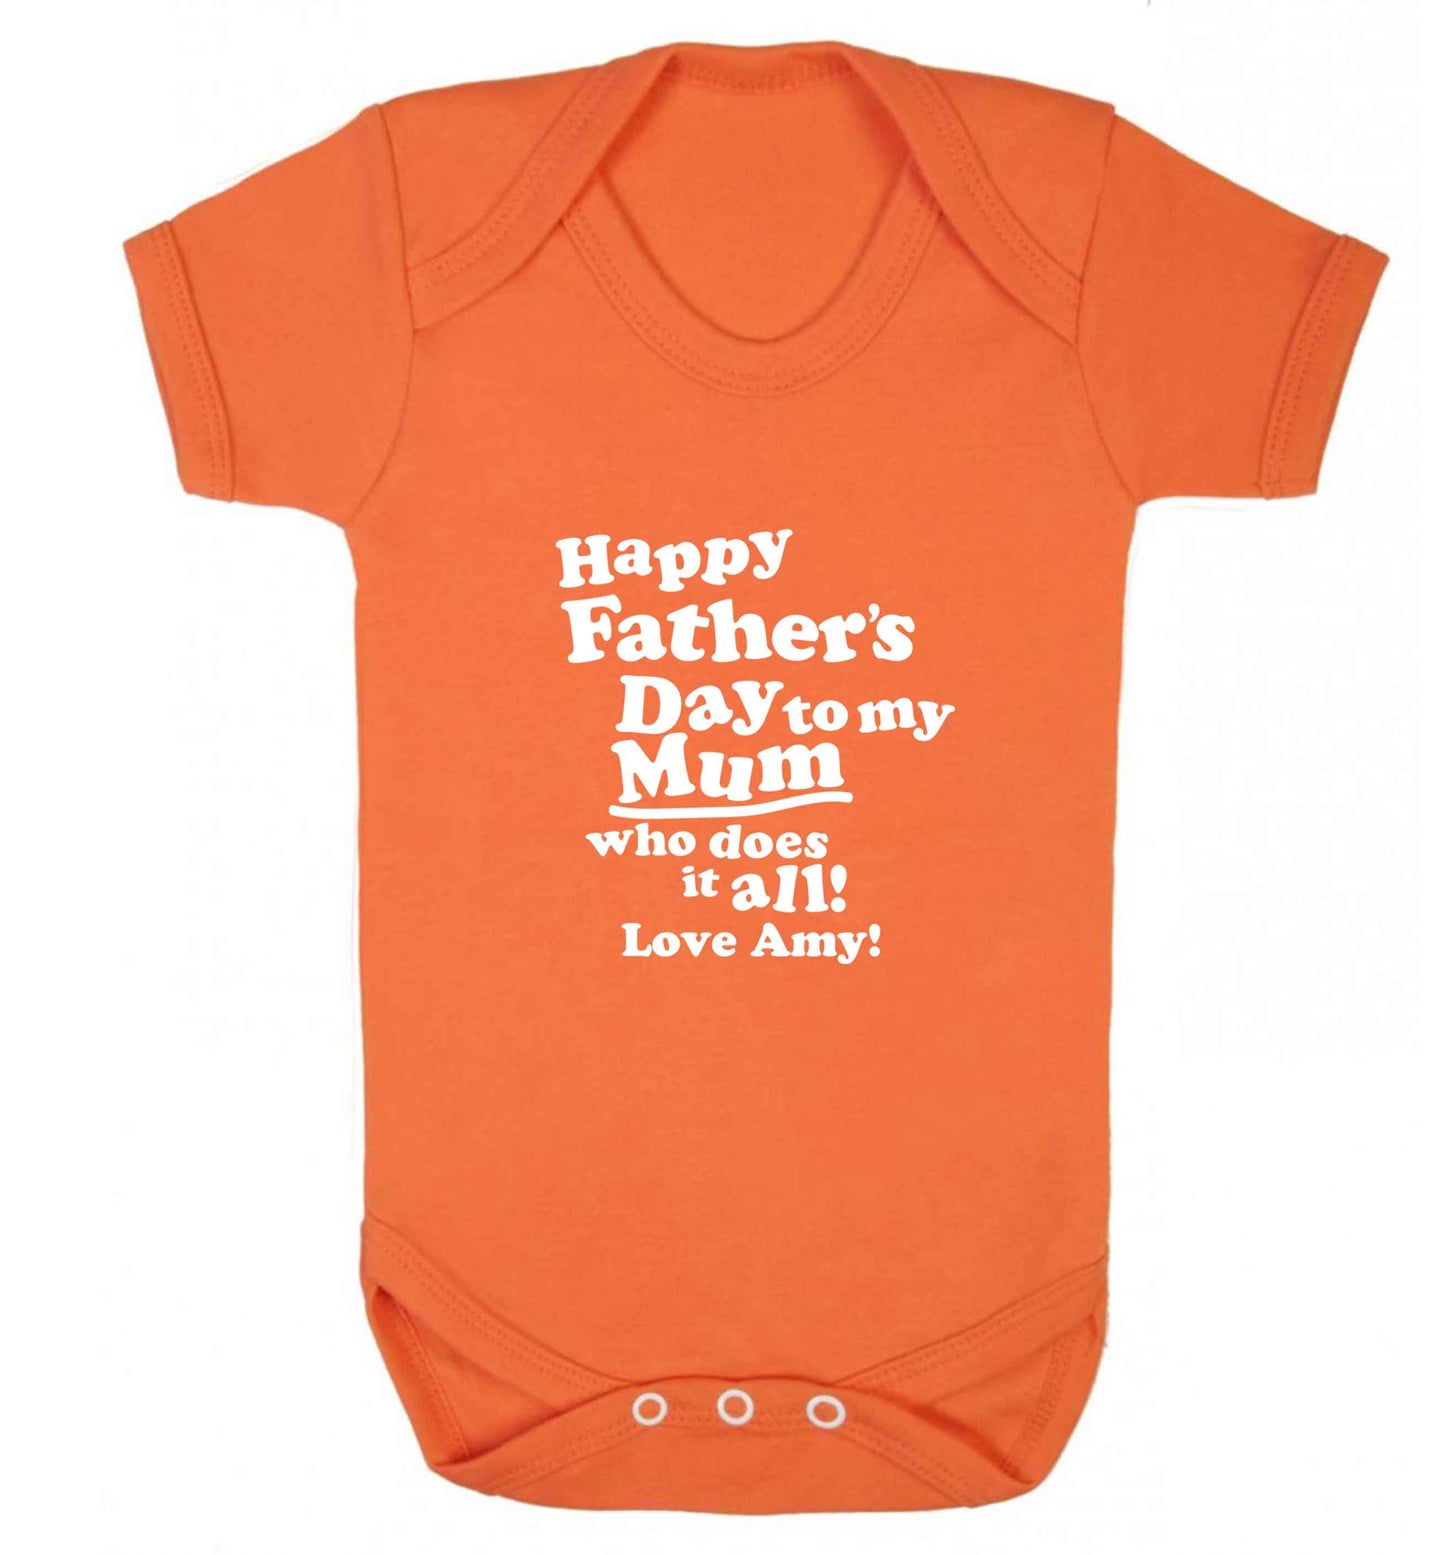 Happy Father's day to my mum who does it all baby vest orange 18-24 months